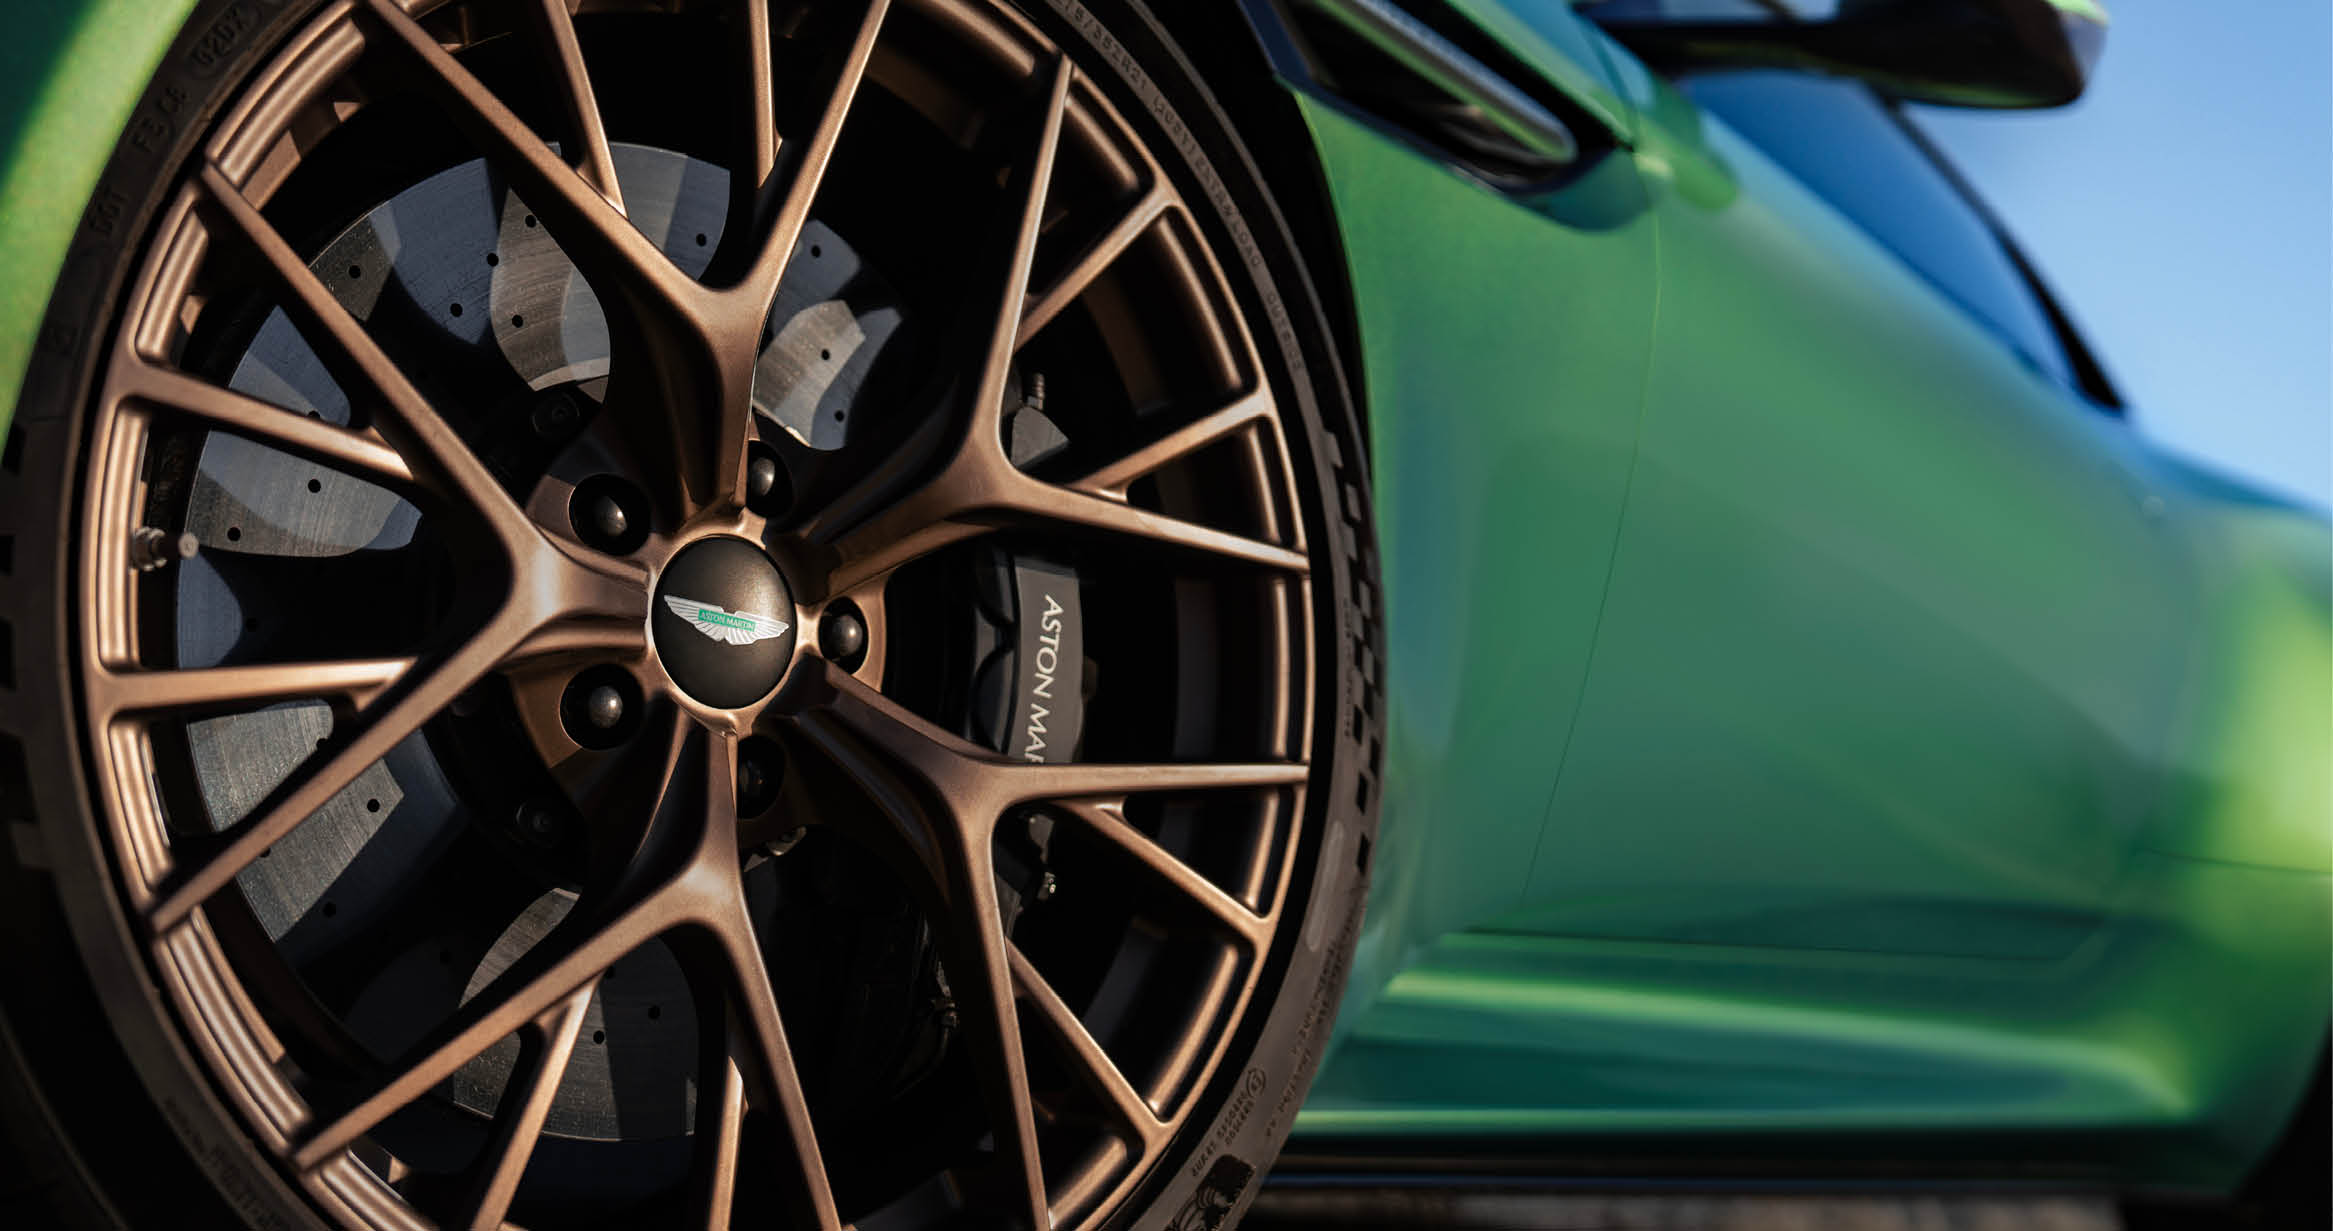 21-inch alloy wheels with brakes and calipers